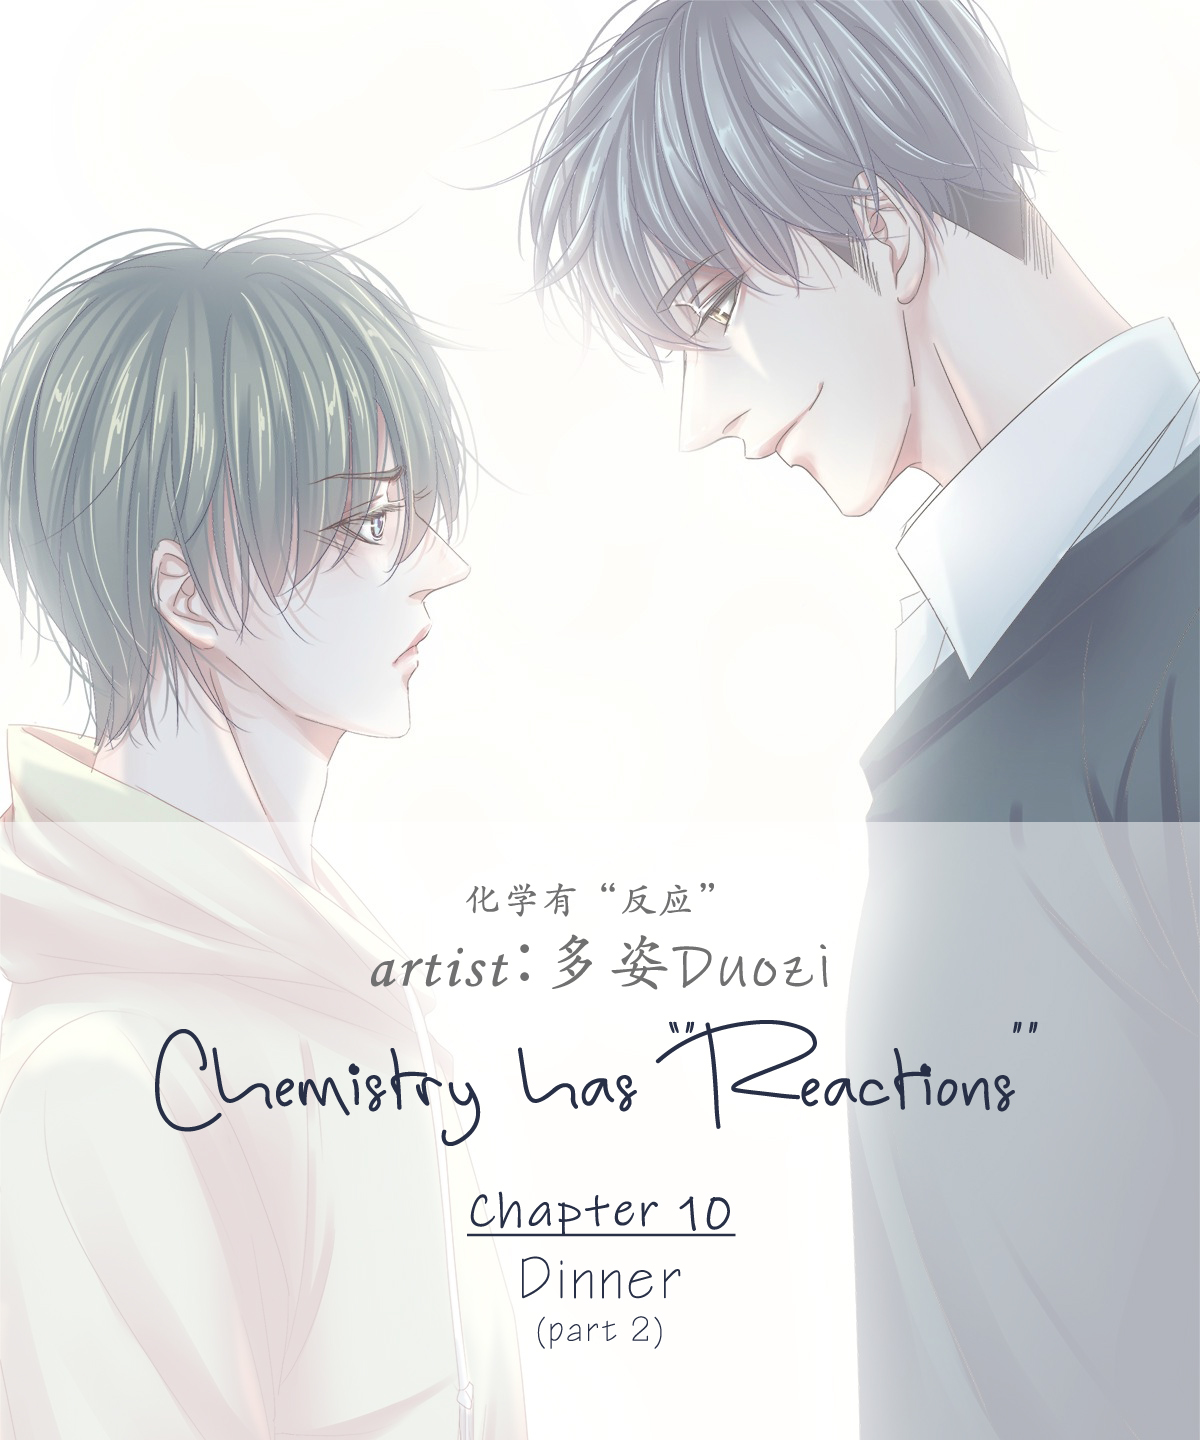 Chemistry has "Reactions" Vol. 1 Ch. 10